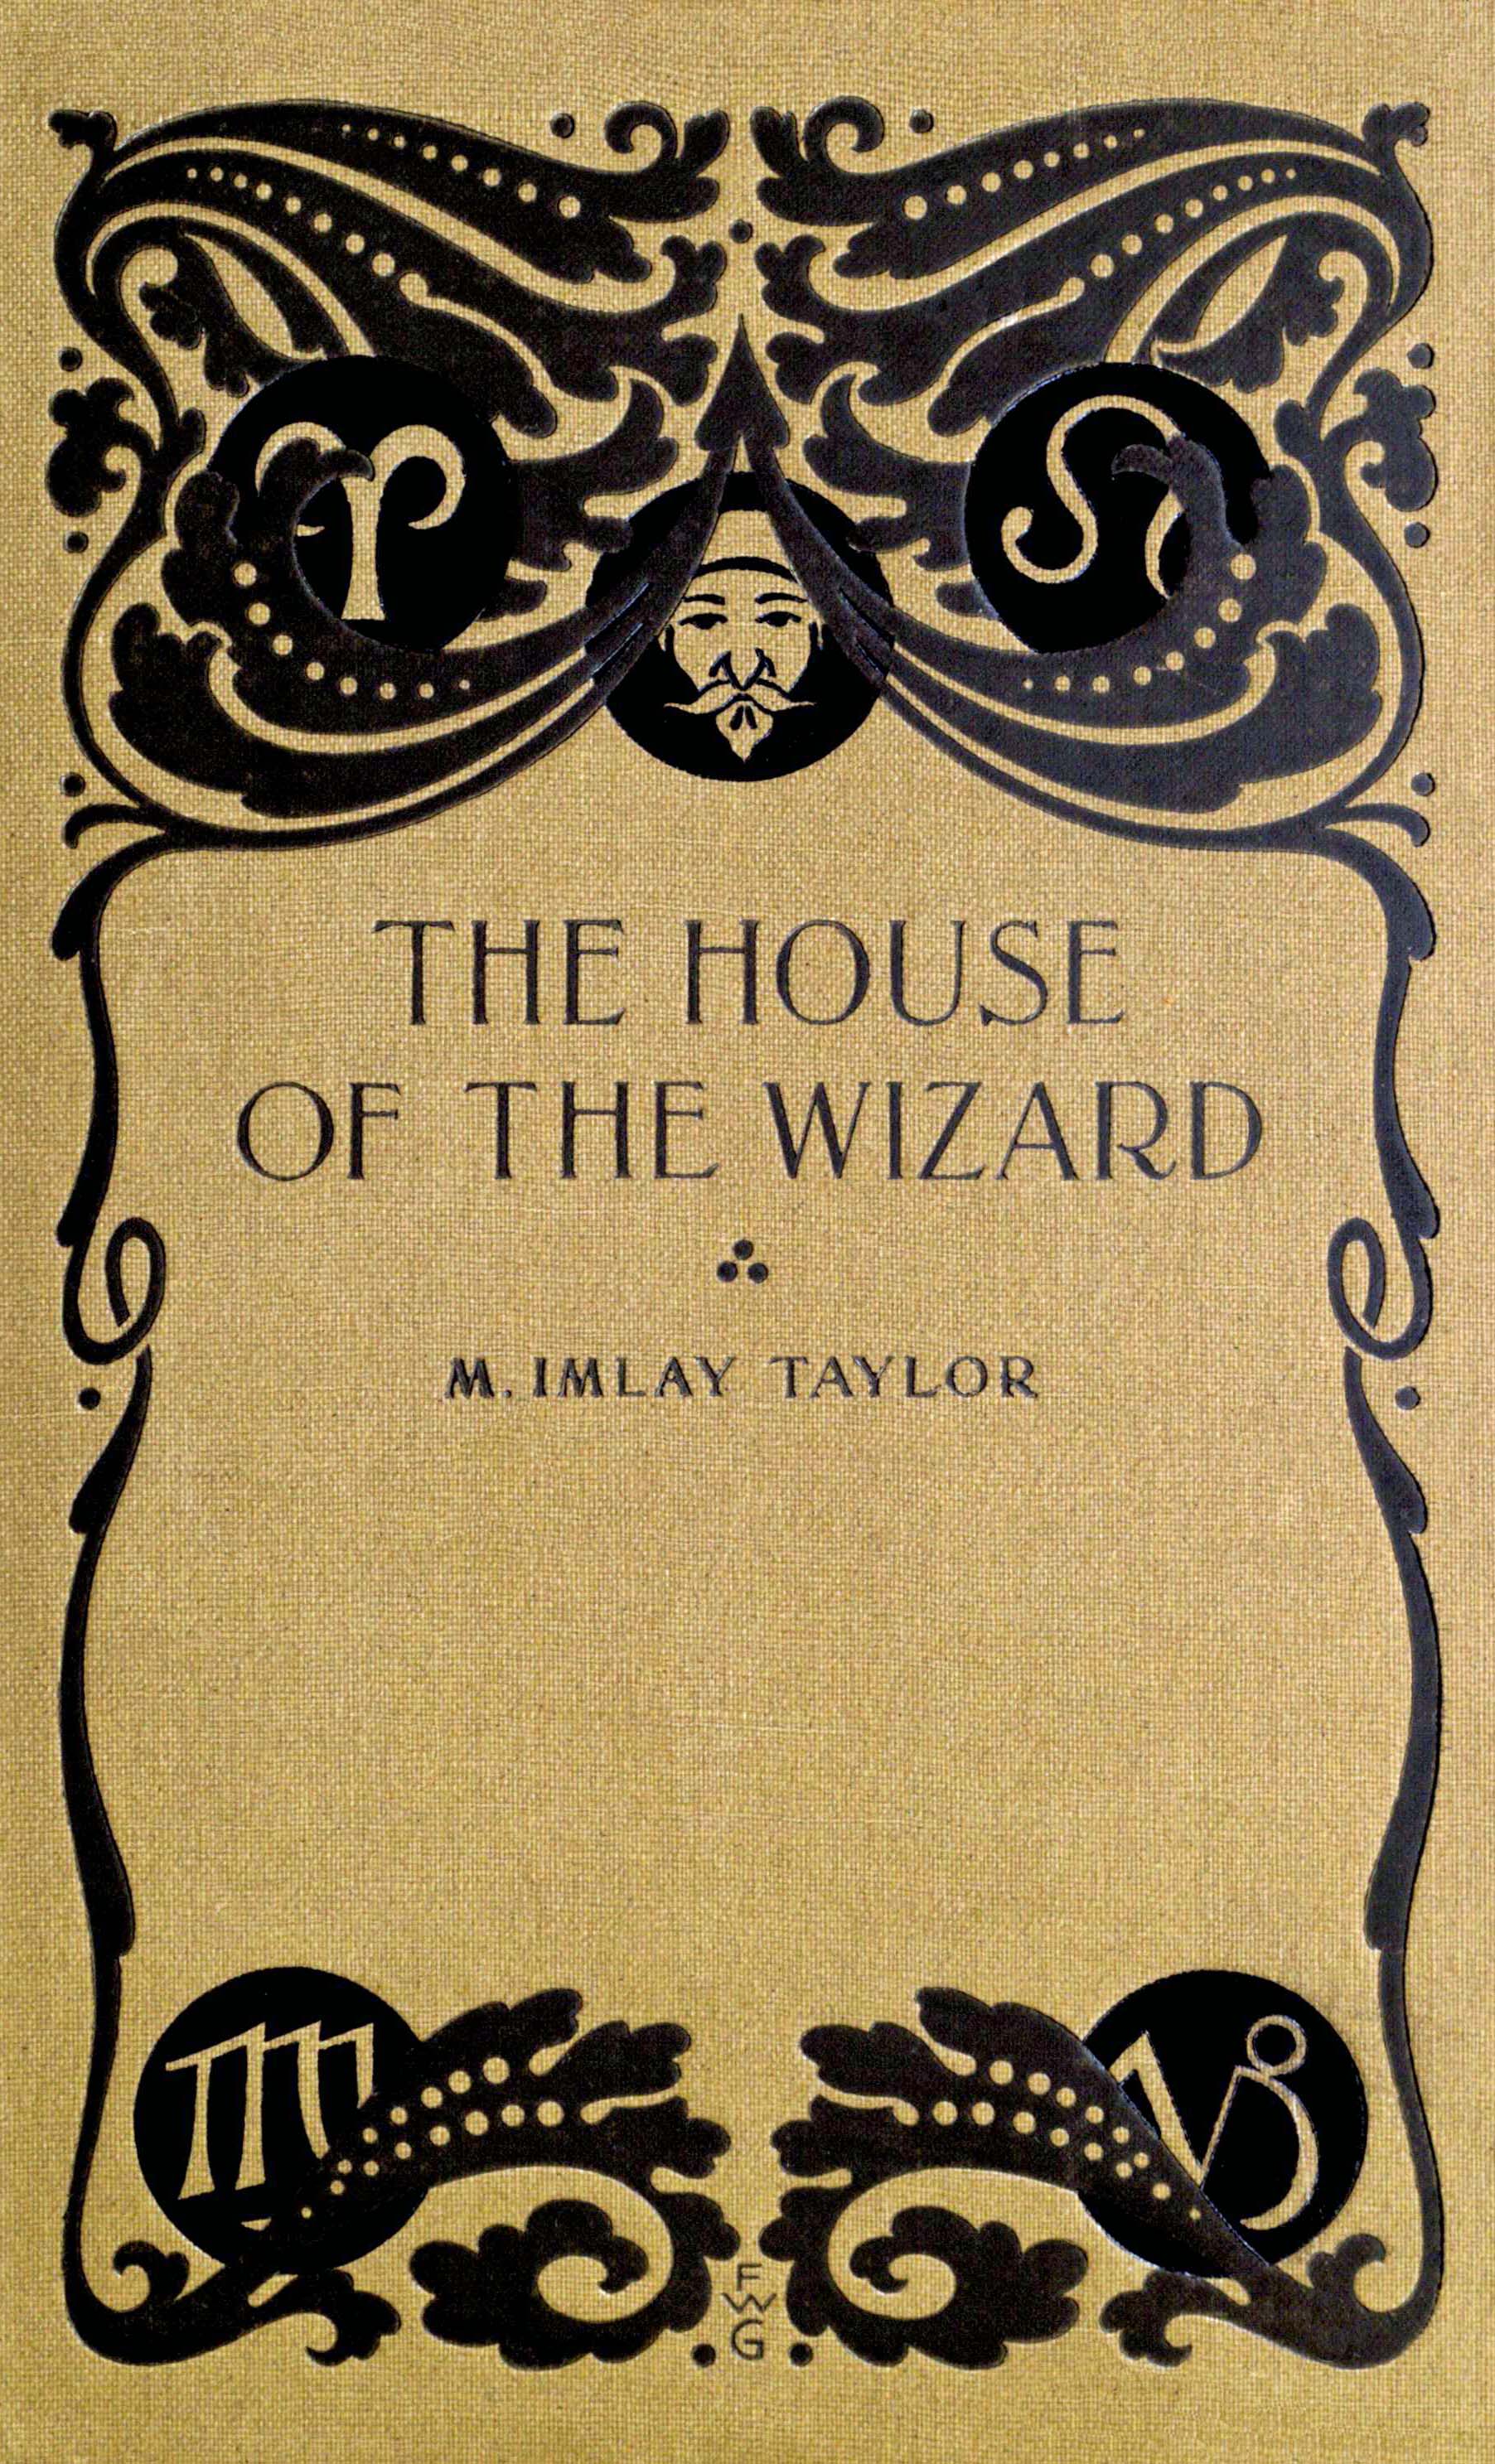 The house of the wizard | Project Gutenberg